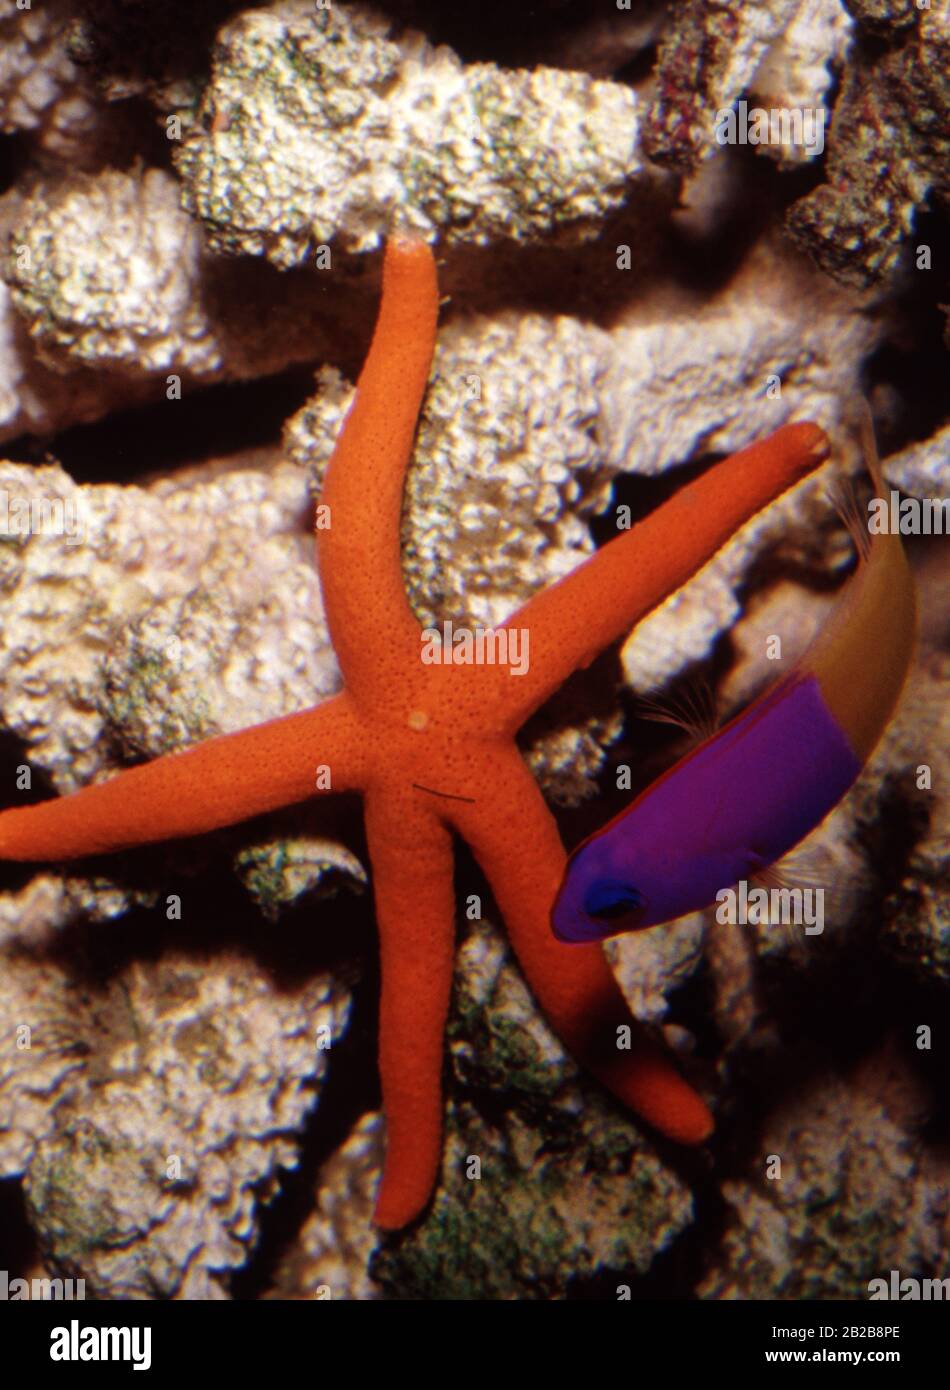 Royal dottyback, Pseudochromis paccagnellae, and red sea star (Echinaster sp.) Stock Photo